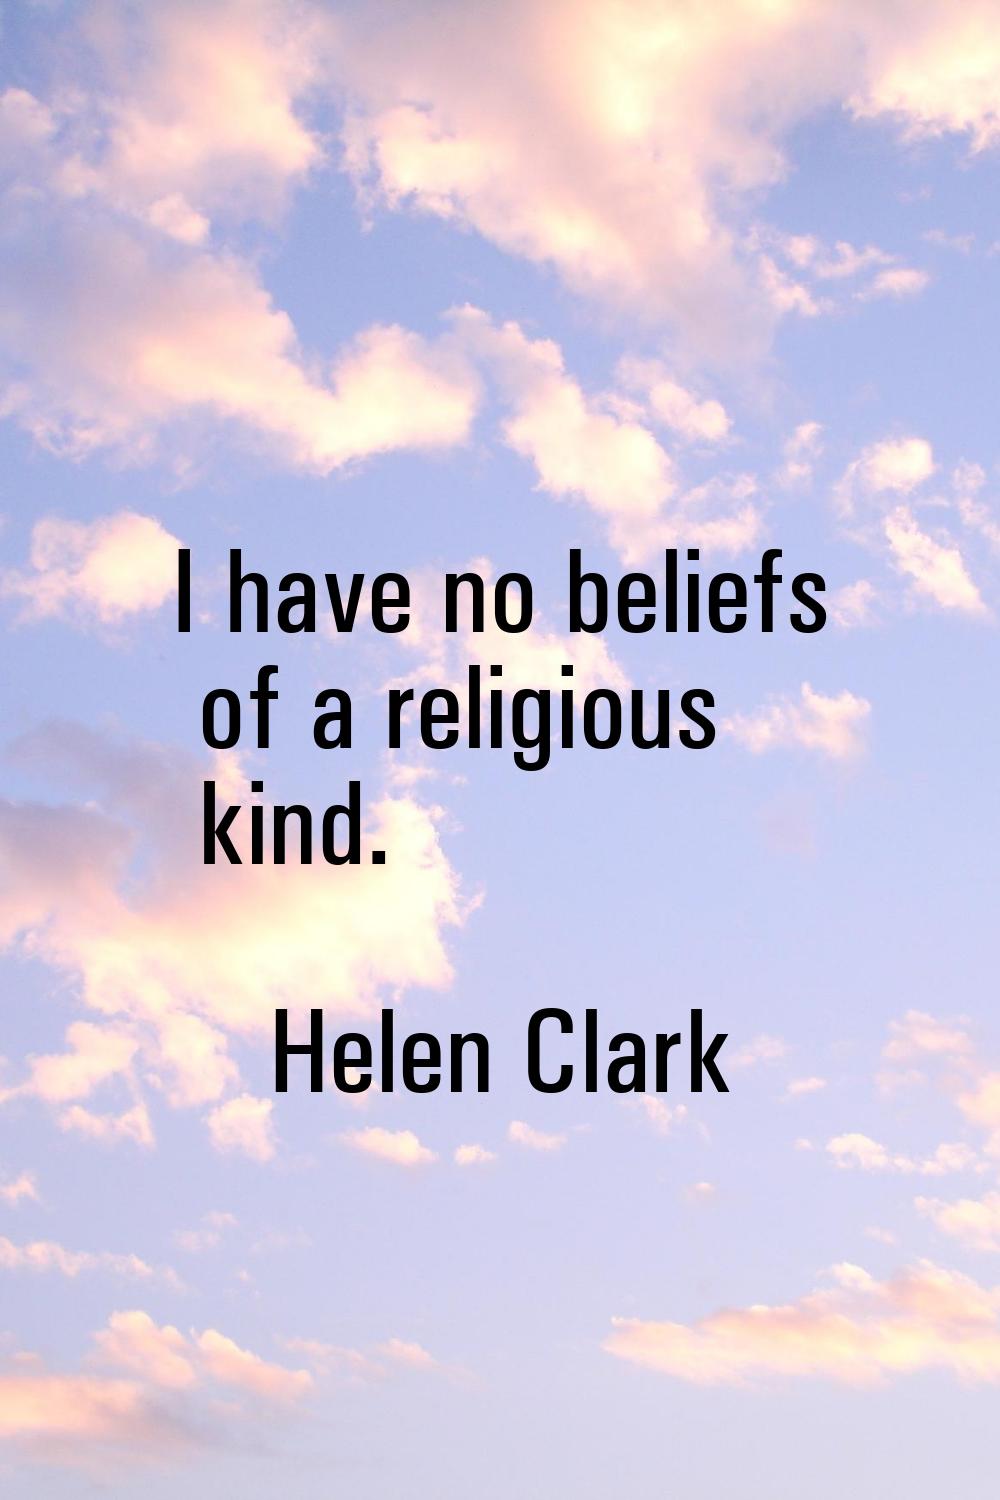 I have no beliefs of a religious kind.